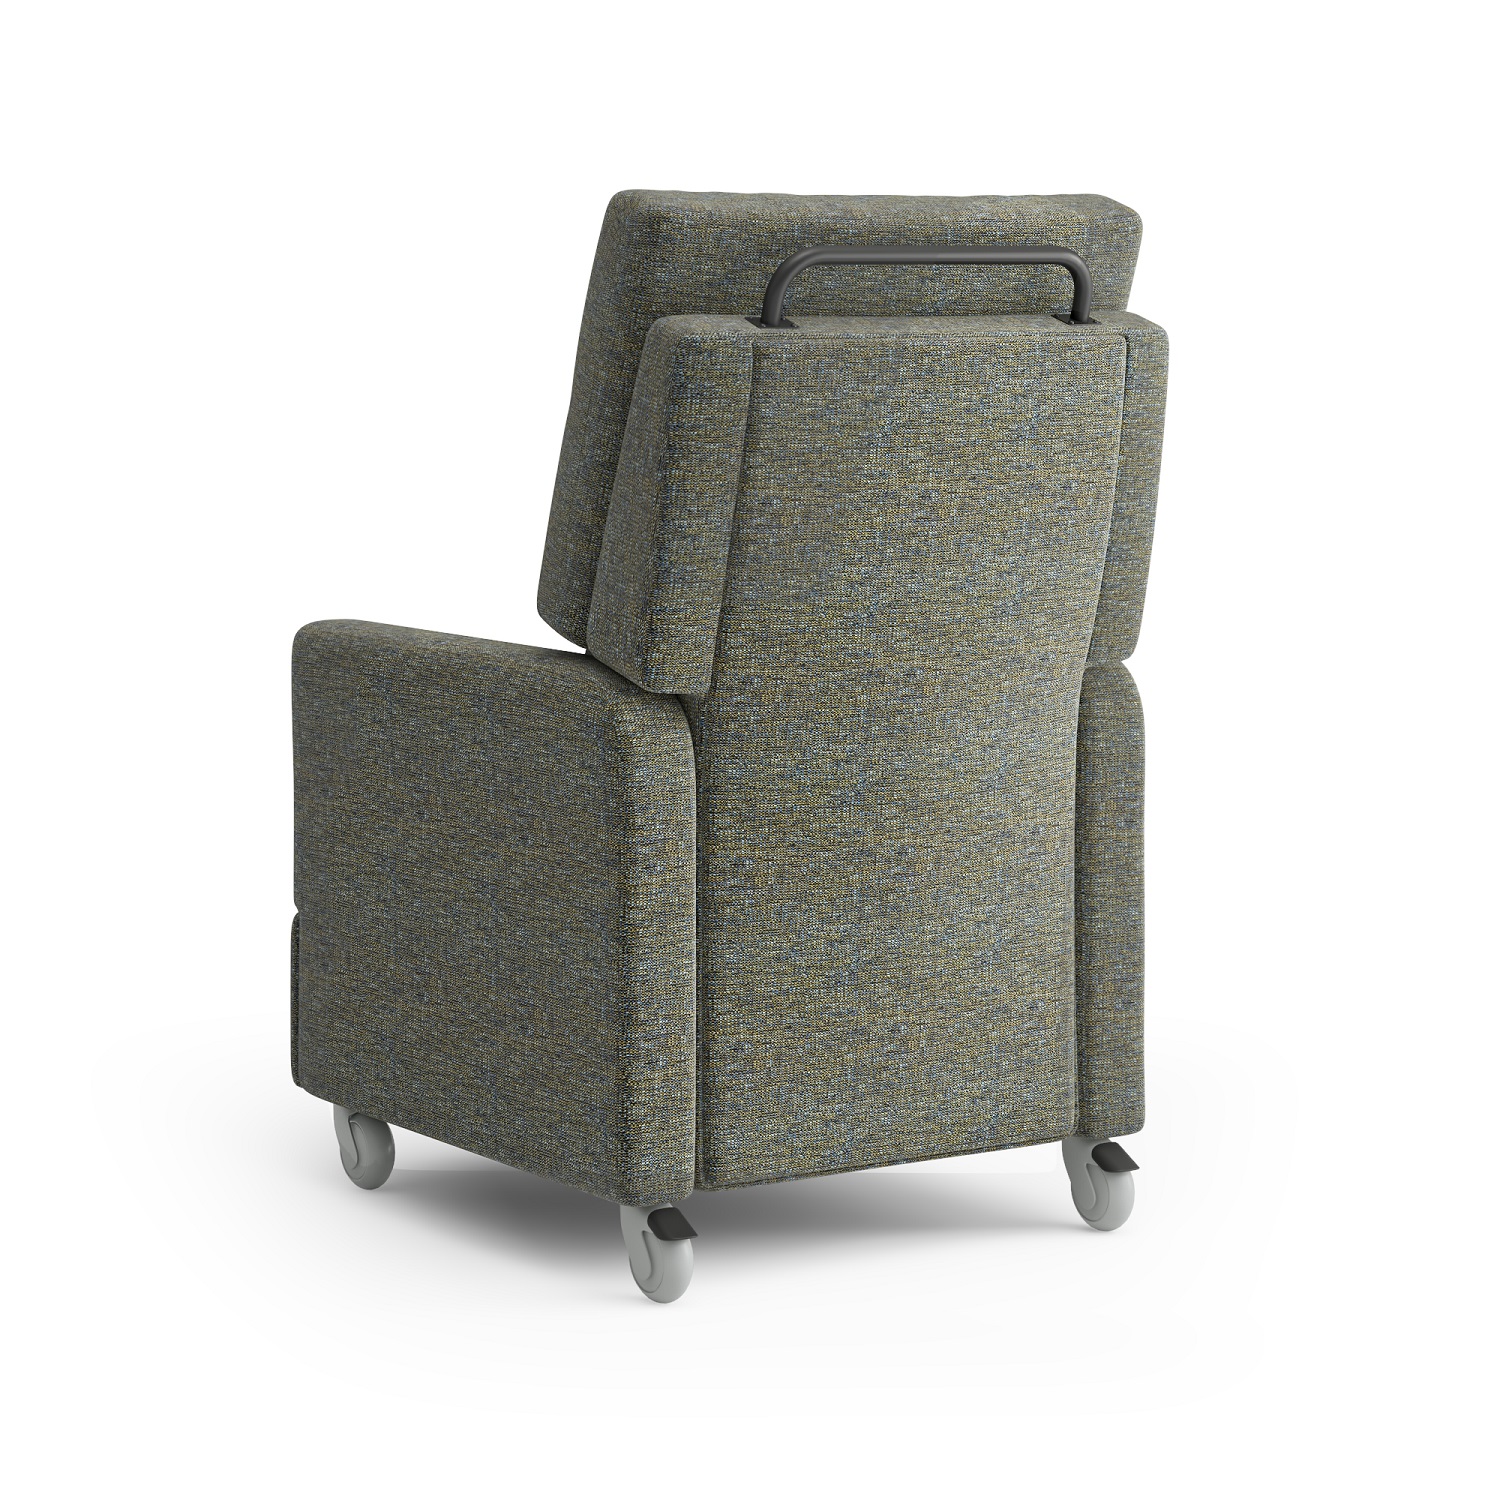 Aged Care Seating Maxwell Recliner, back view